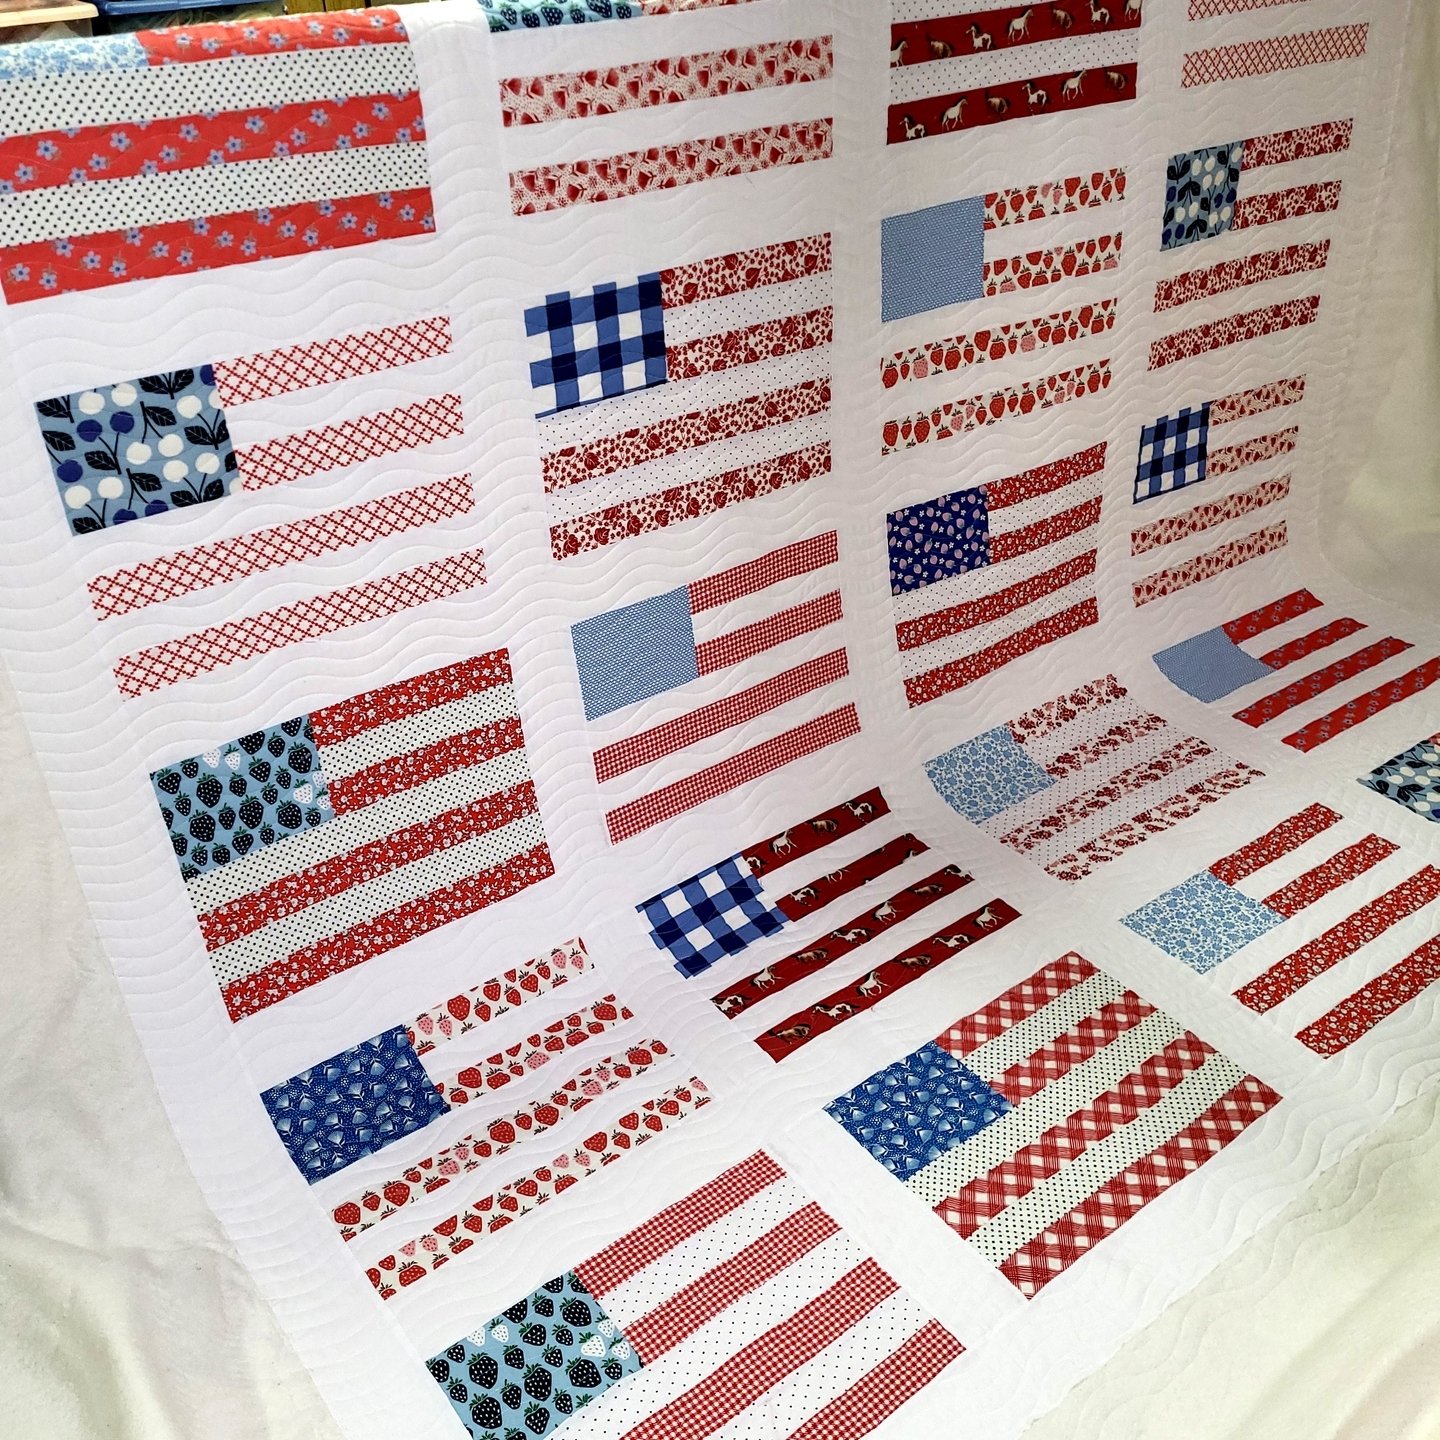 Bethany sent this Stars &amp; Stripes quilt to me recently and I LOVE all of the different fabrics that make up the flags!'

It's fantastic!

Bethany was also a first-time client, so she got a 20% discount on quilting services! All first-time clients